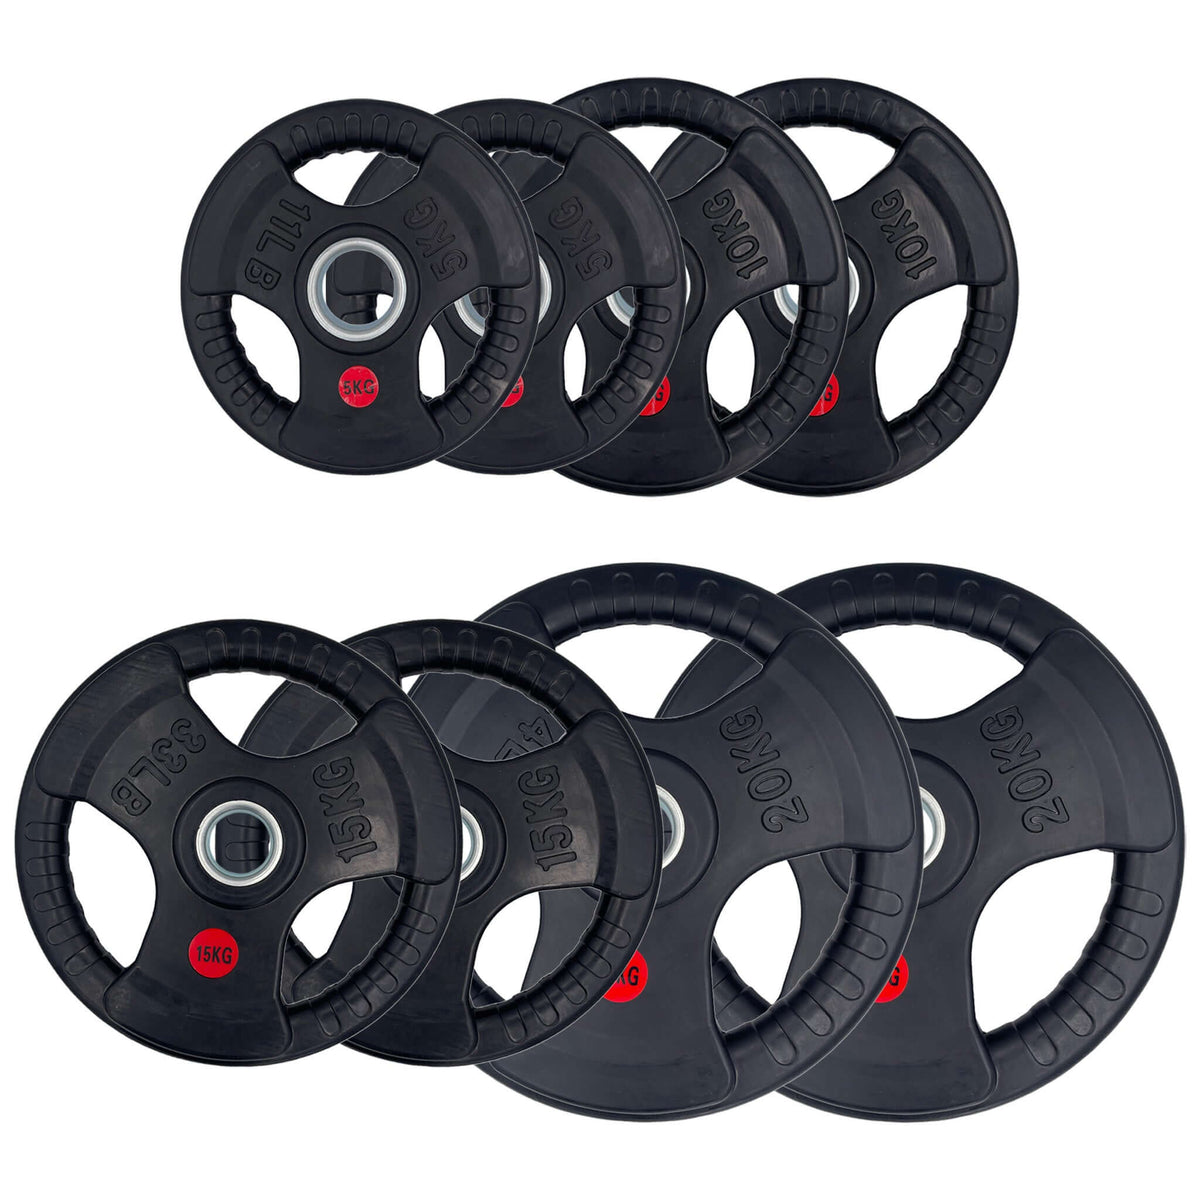 100kg Rubber Tri-Grip Weight Plates Package Type-O | INSOURCE